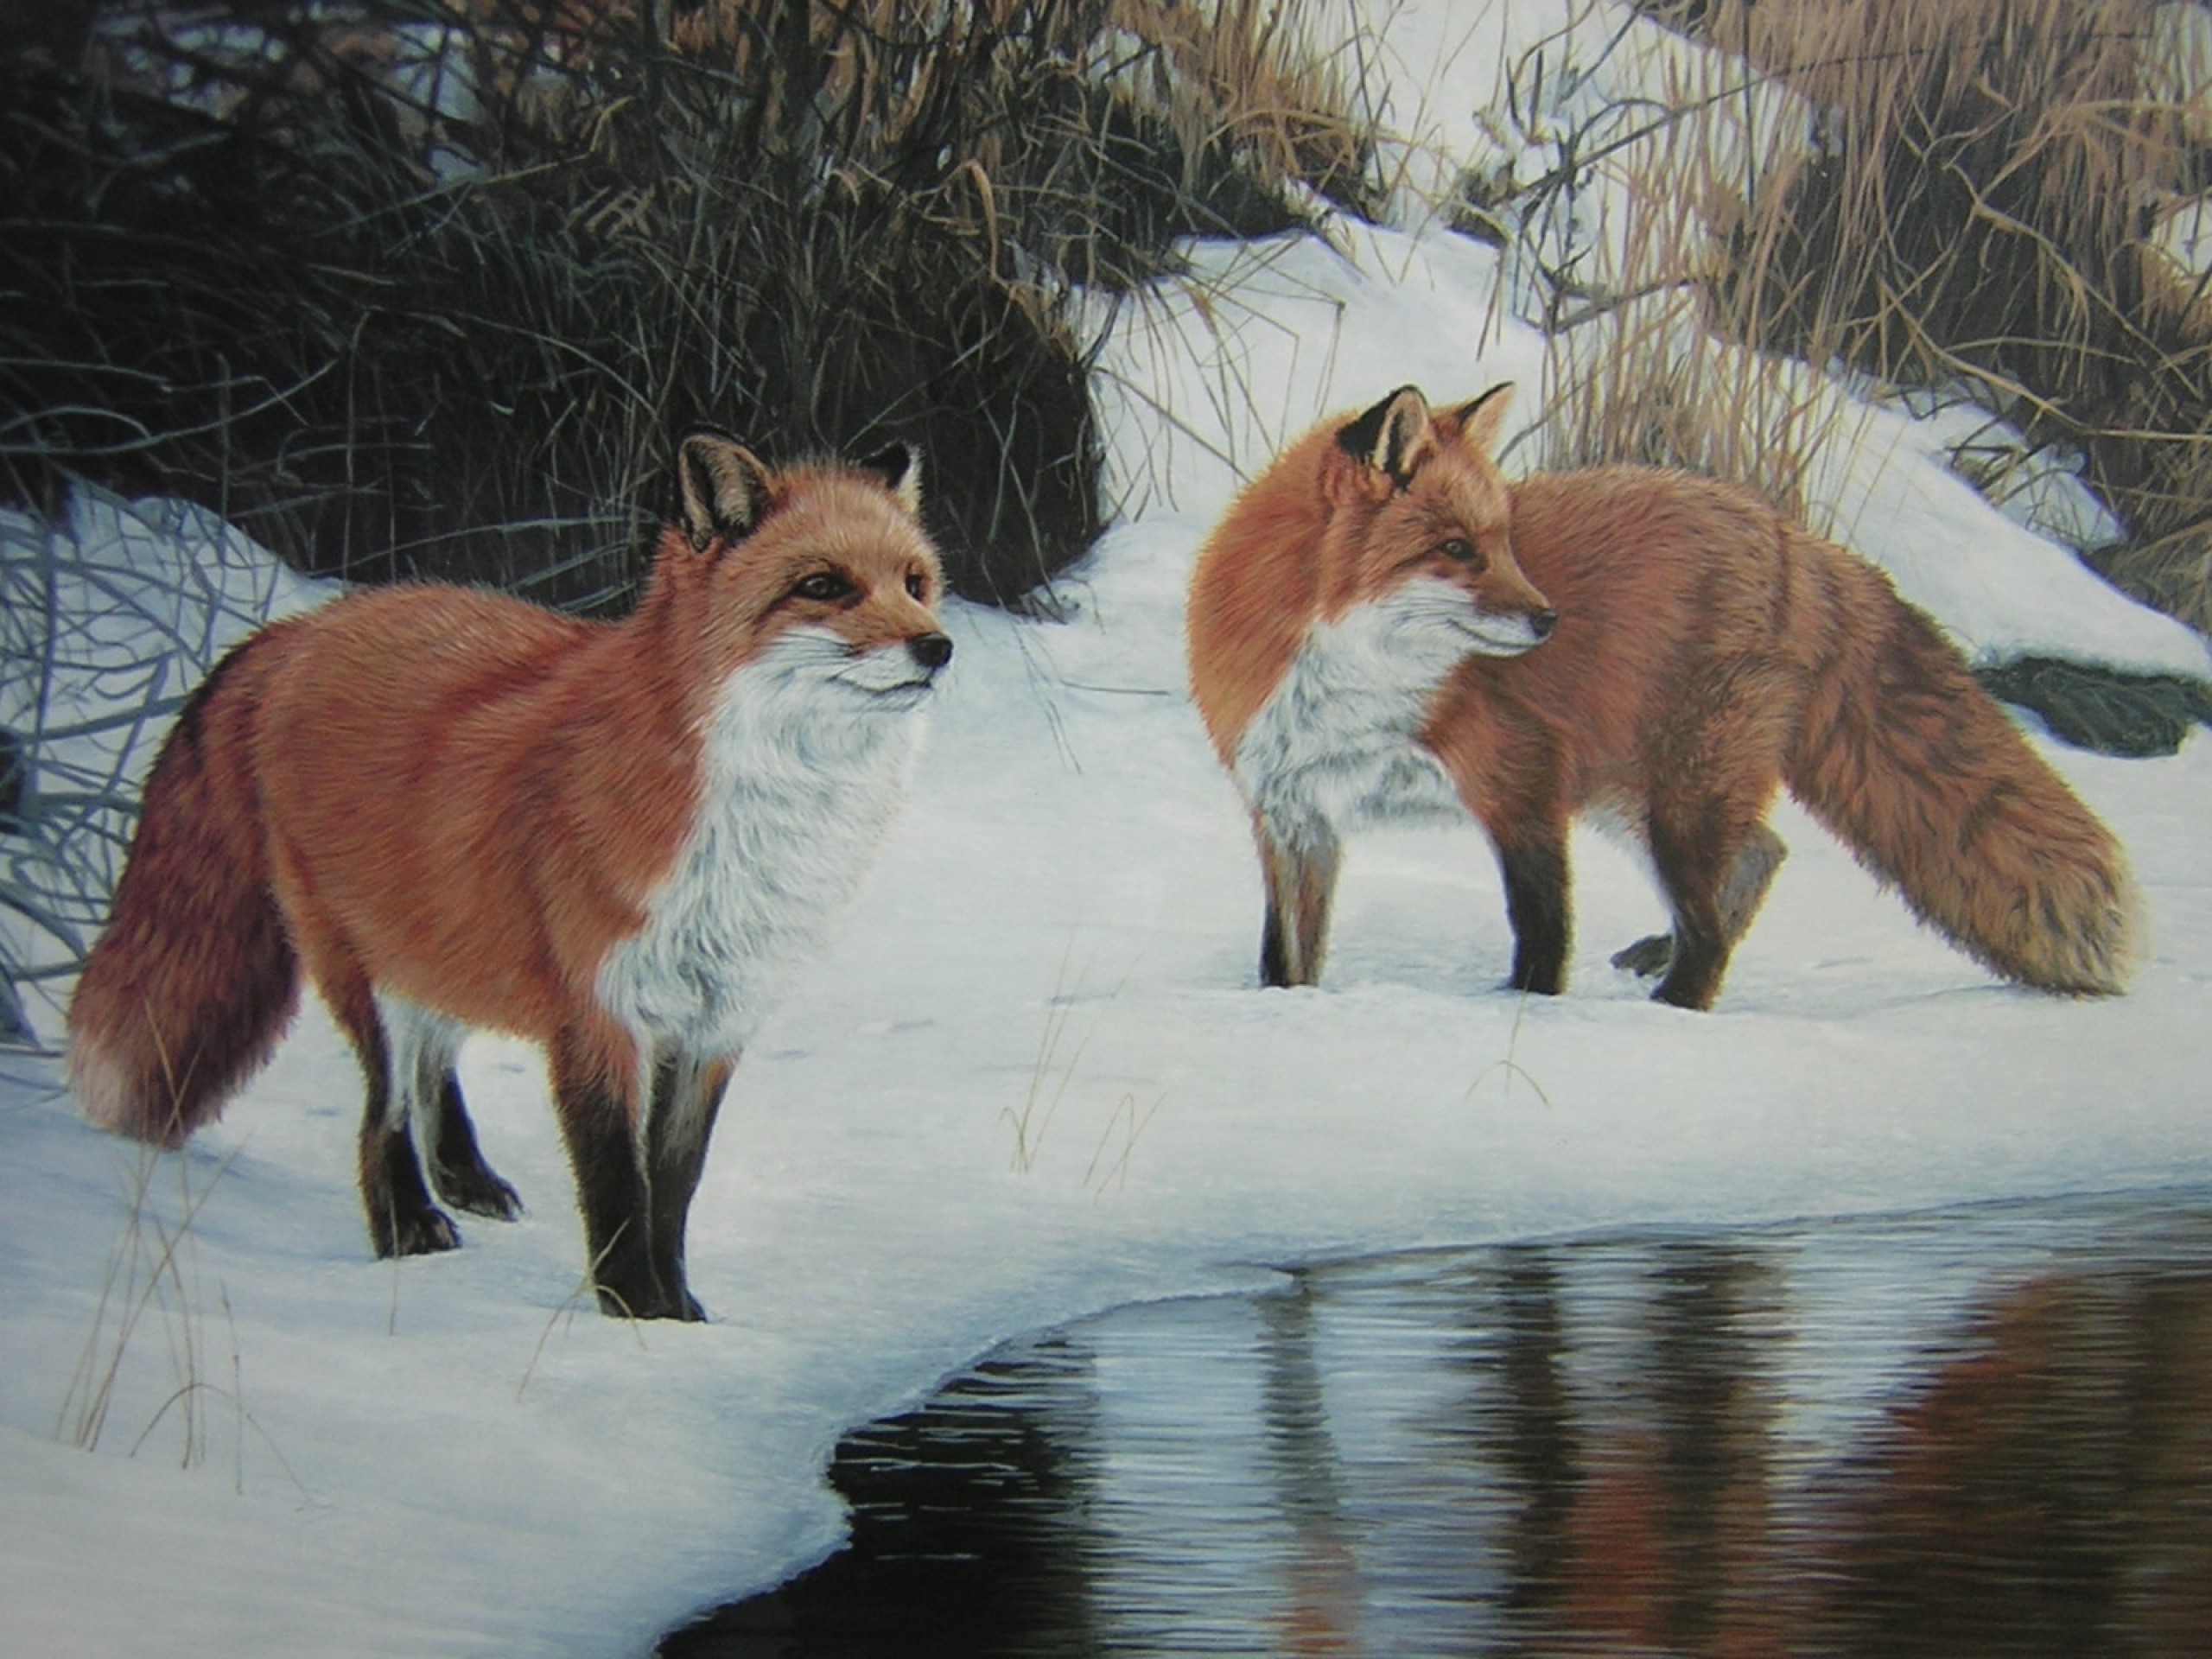 2560x1920 Foxes Snow Water Gras Painting wallpapers and stock photos